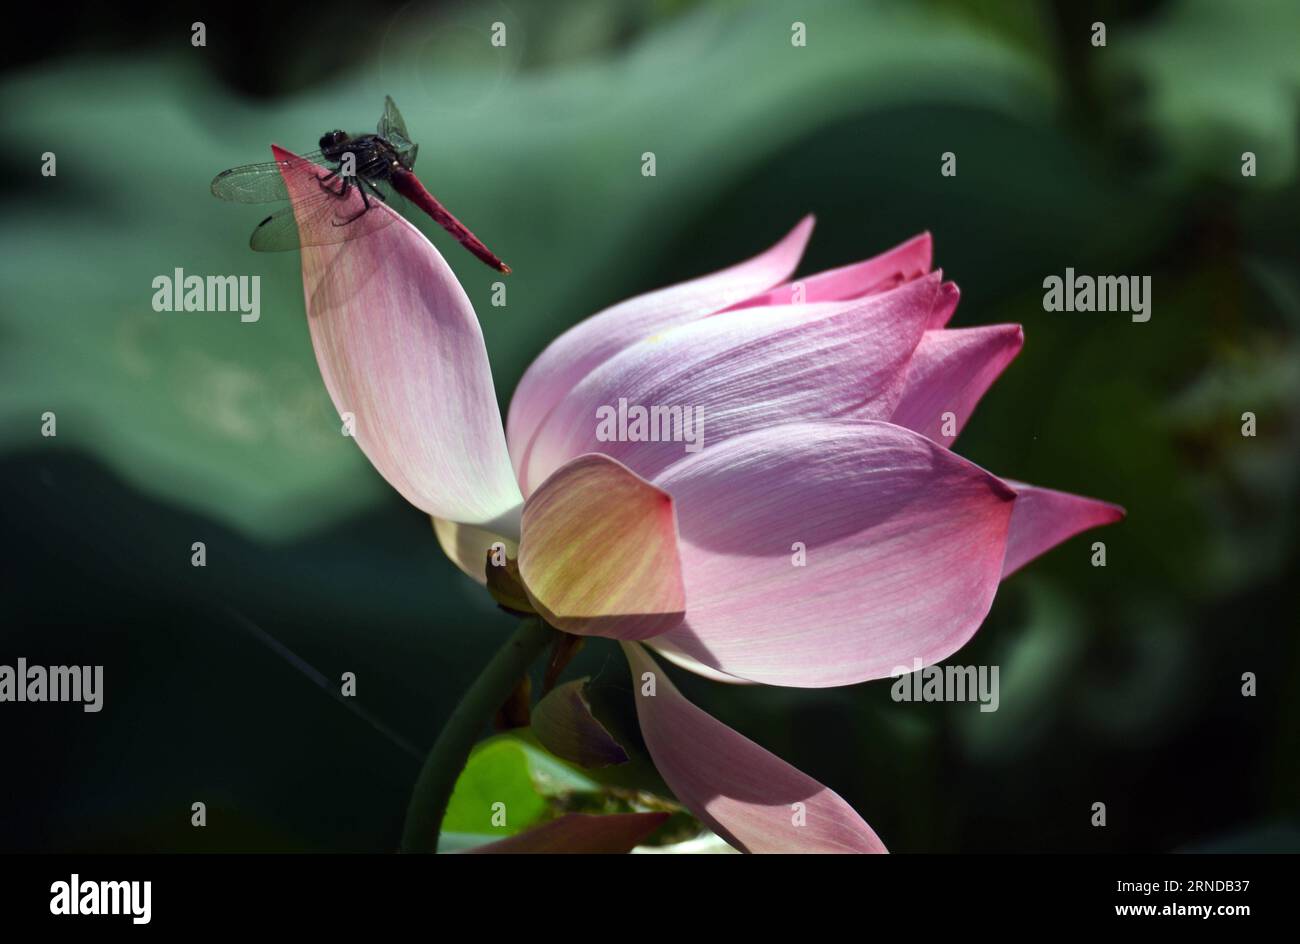 Libellen auf Lotus (160514) -- TAIPEI, May 13, 2016 -- A dragonfly rests on a lotus at a lotus pool in Taipei s Palace Museum, southeast China s Taiwan, May 13, 2016. ) (zwx) CHINA-TAIPEI-LOTUS(CN) WuxChing-teng PUBLICATIONxNOTxINxCHN   Dragonflies on Lotus 160514 Taipei May 13 2016 a Dragonfly rests ON a Lotus AT a Lotus Pool in Taipei S Palace Museum South East China S TAIWAN May 13 2016 zwx China Taipei Lotus CN WuxChing Teng PUBLICATIONxNOTxINxCHN Stock Photo